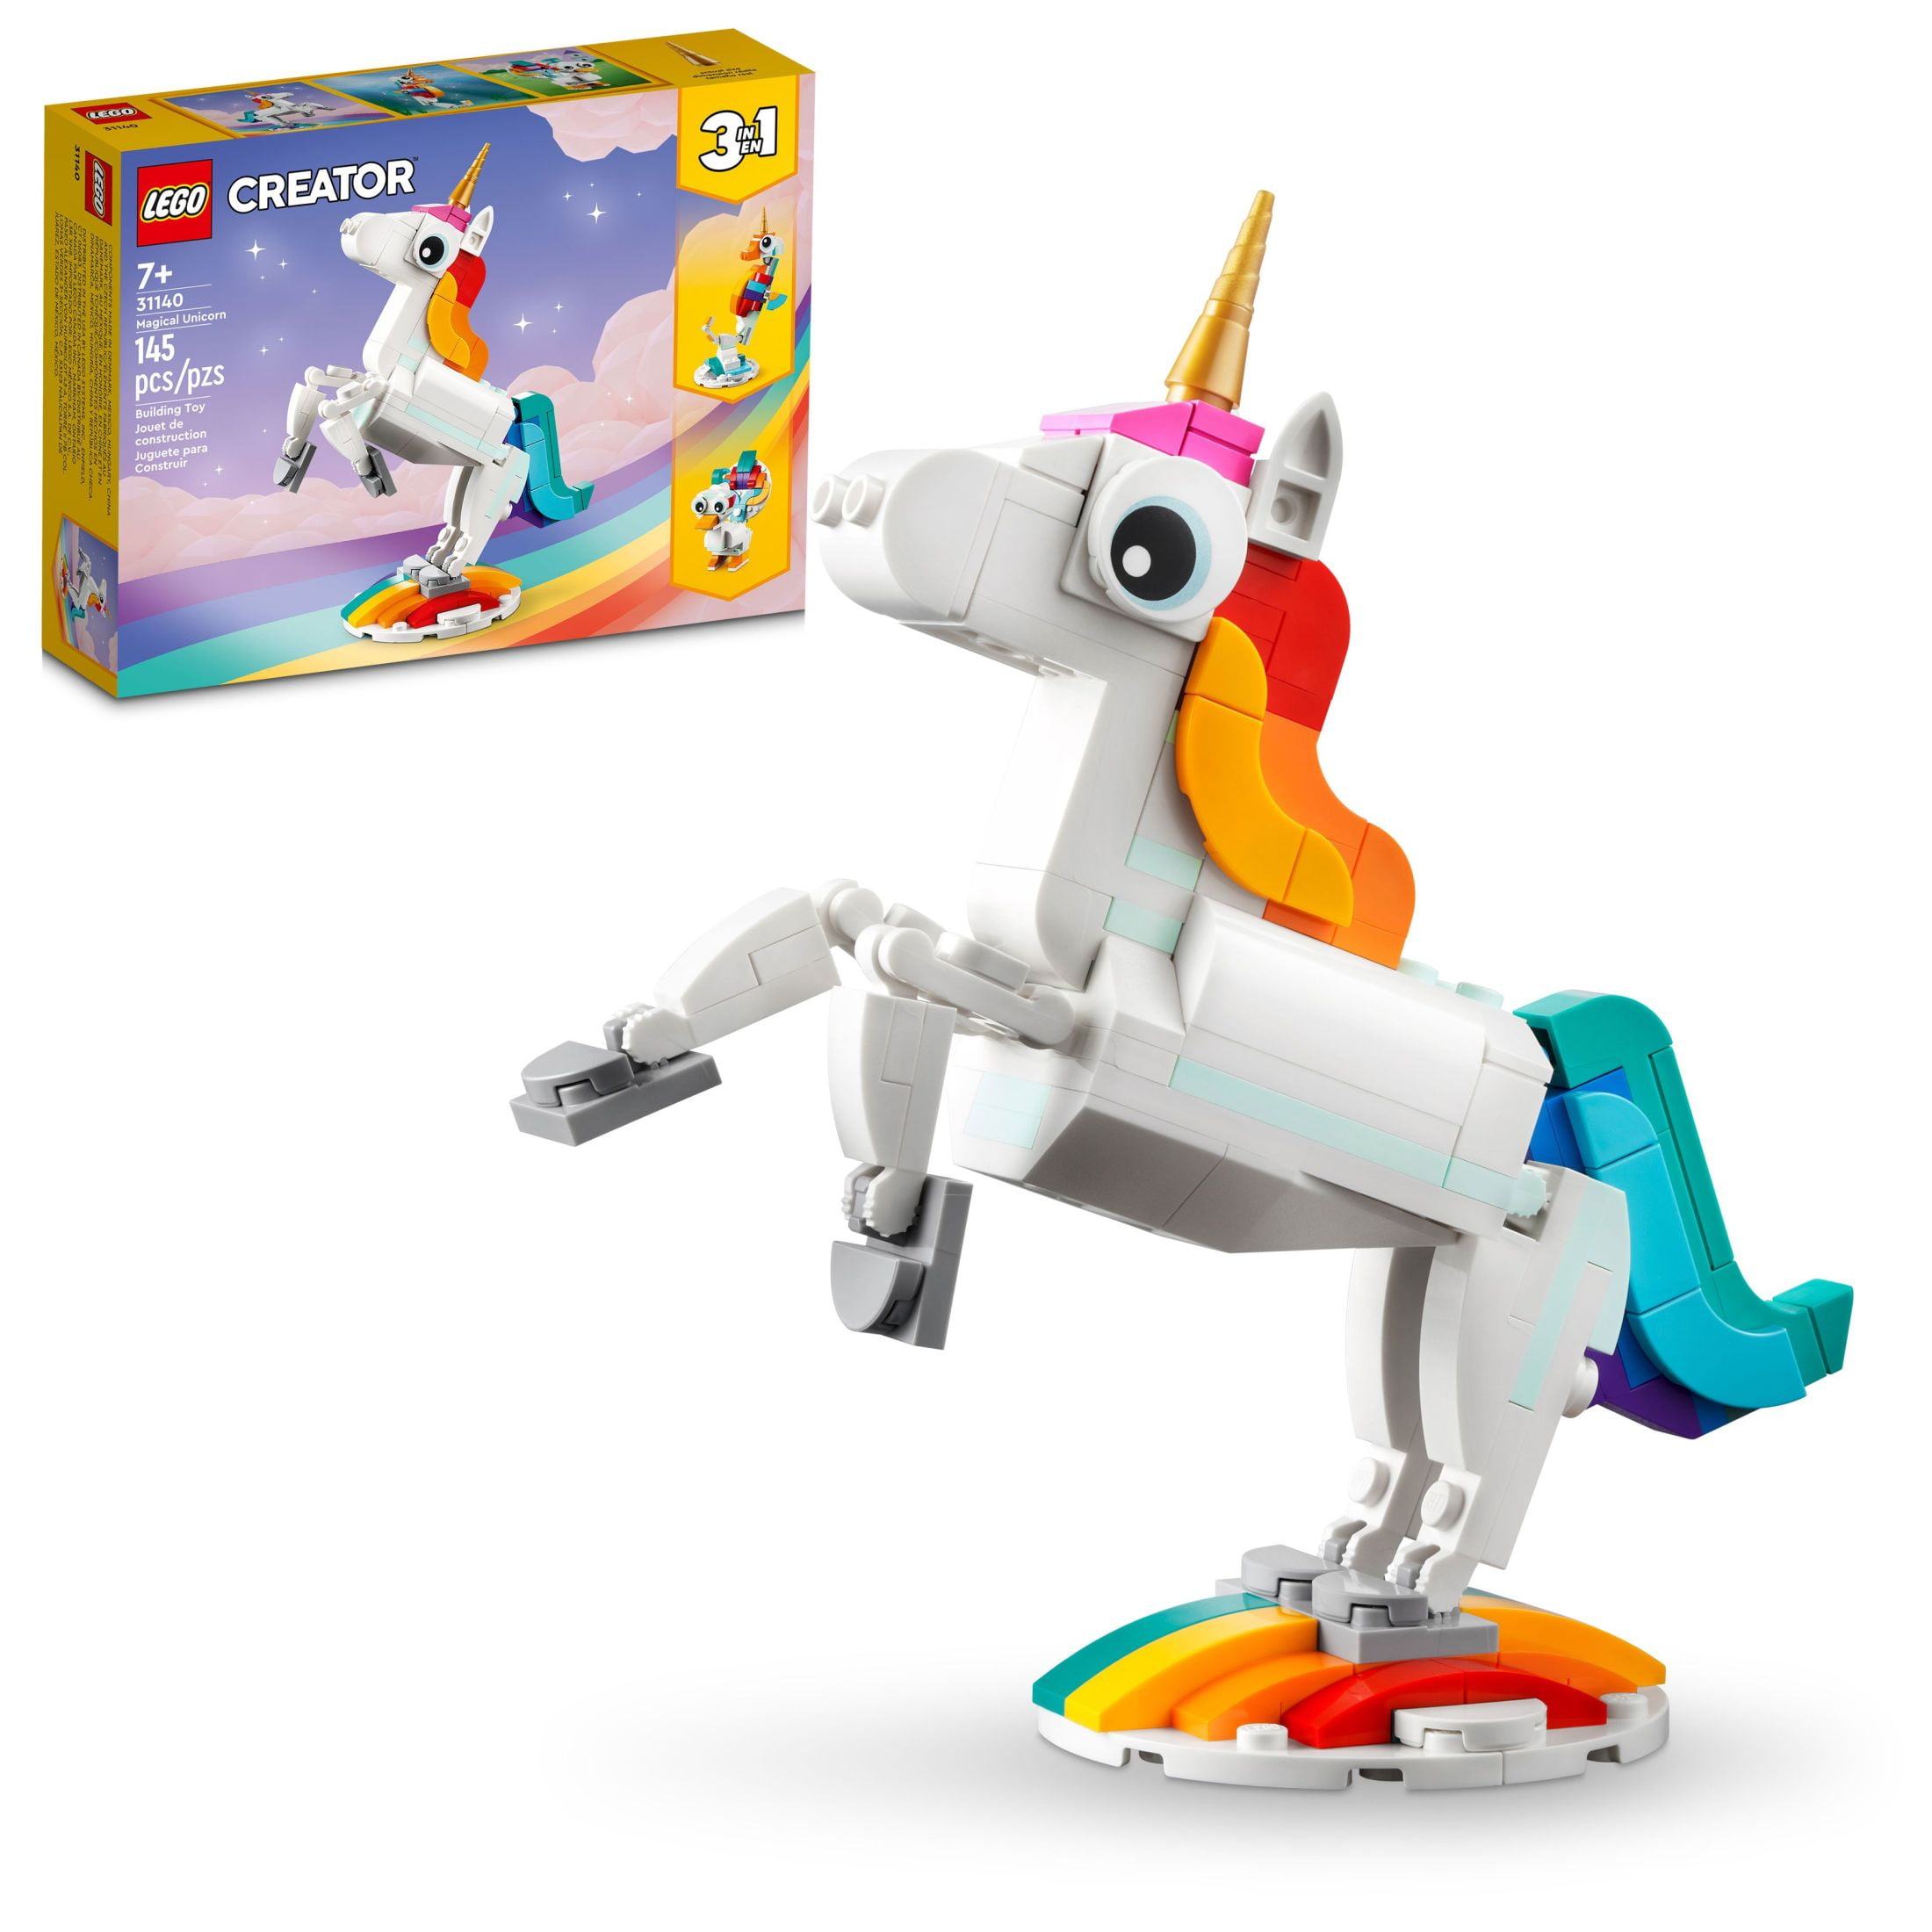 LEGO Creator 3 in 1 Magical Unicorn Toy to Seahorse to Peacock, Rainbow Animal Figures, Unicorn Gift for Girls and Boys, Buildable Toys, 31140 $9.97